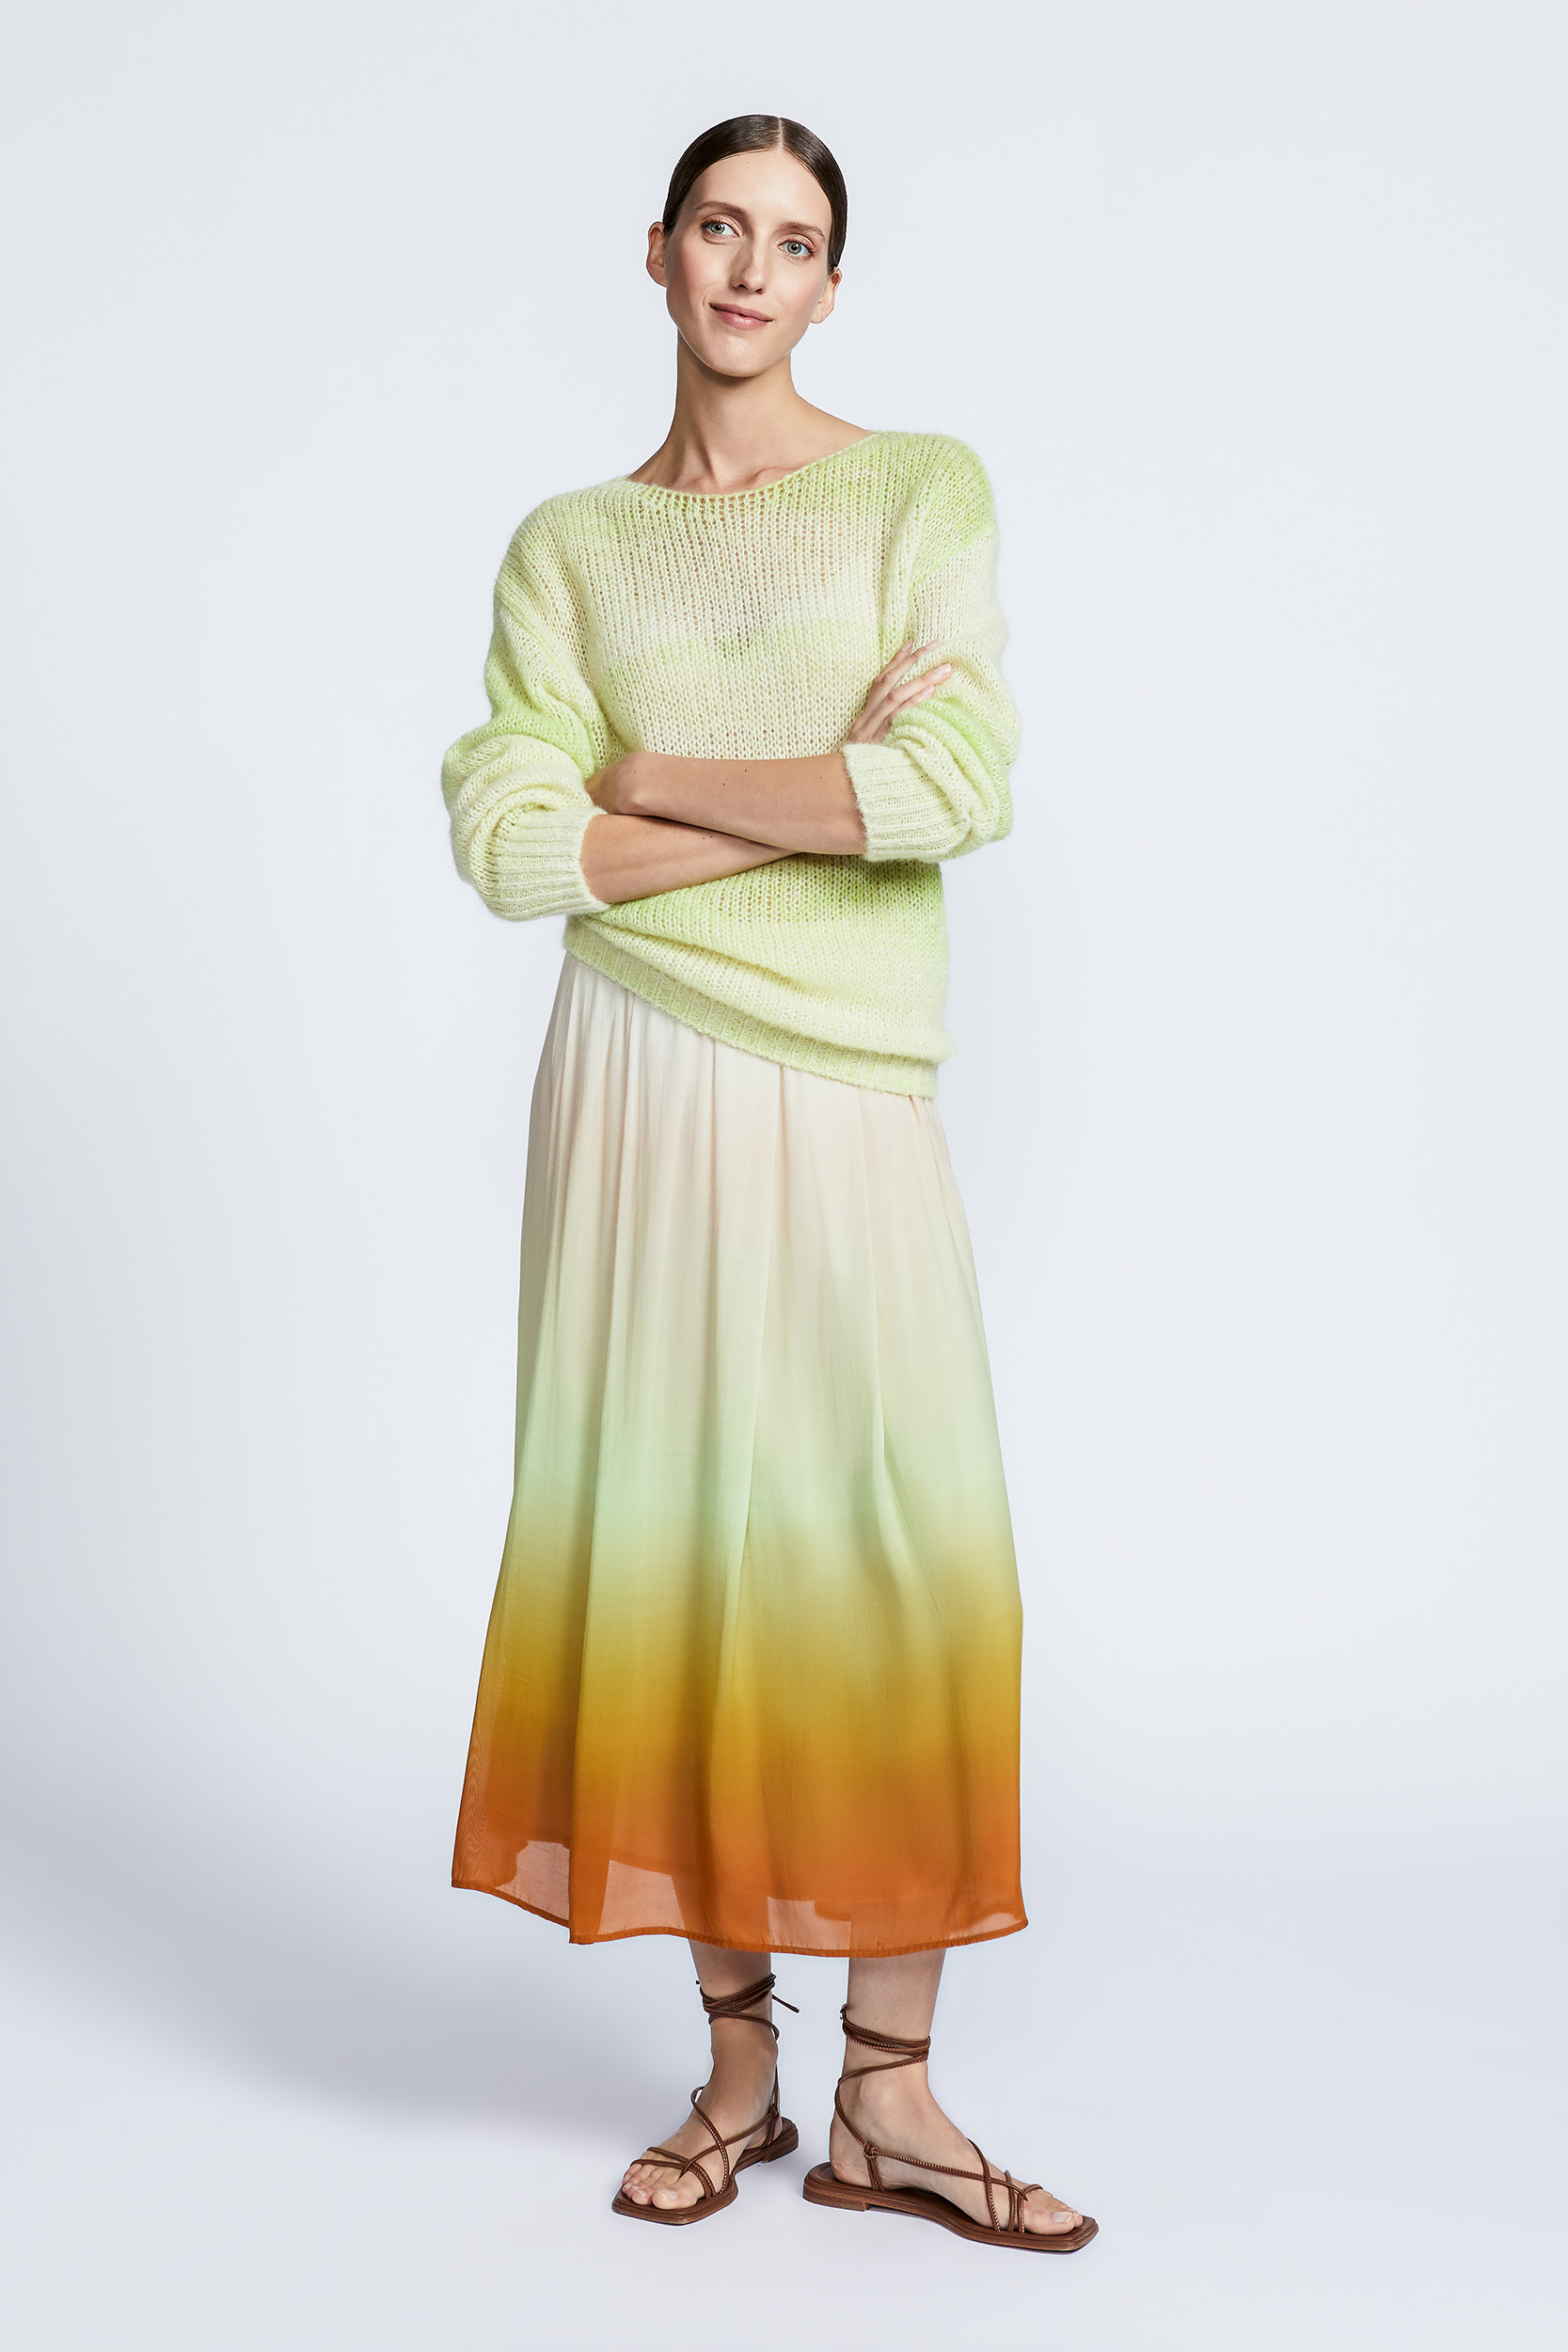 Maxi skirt with gradient